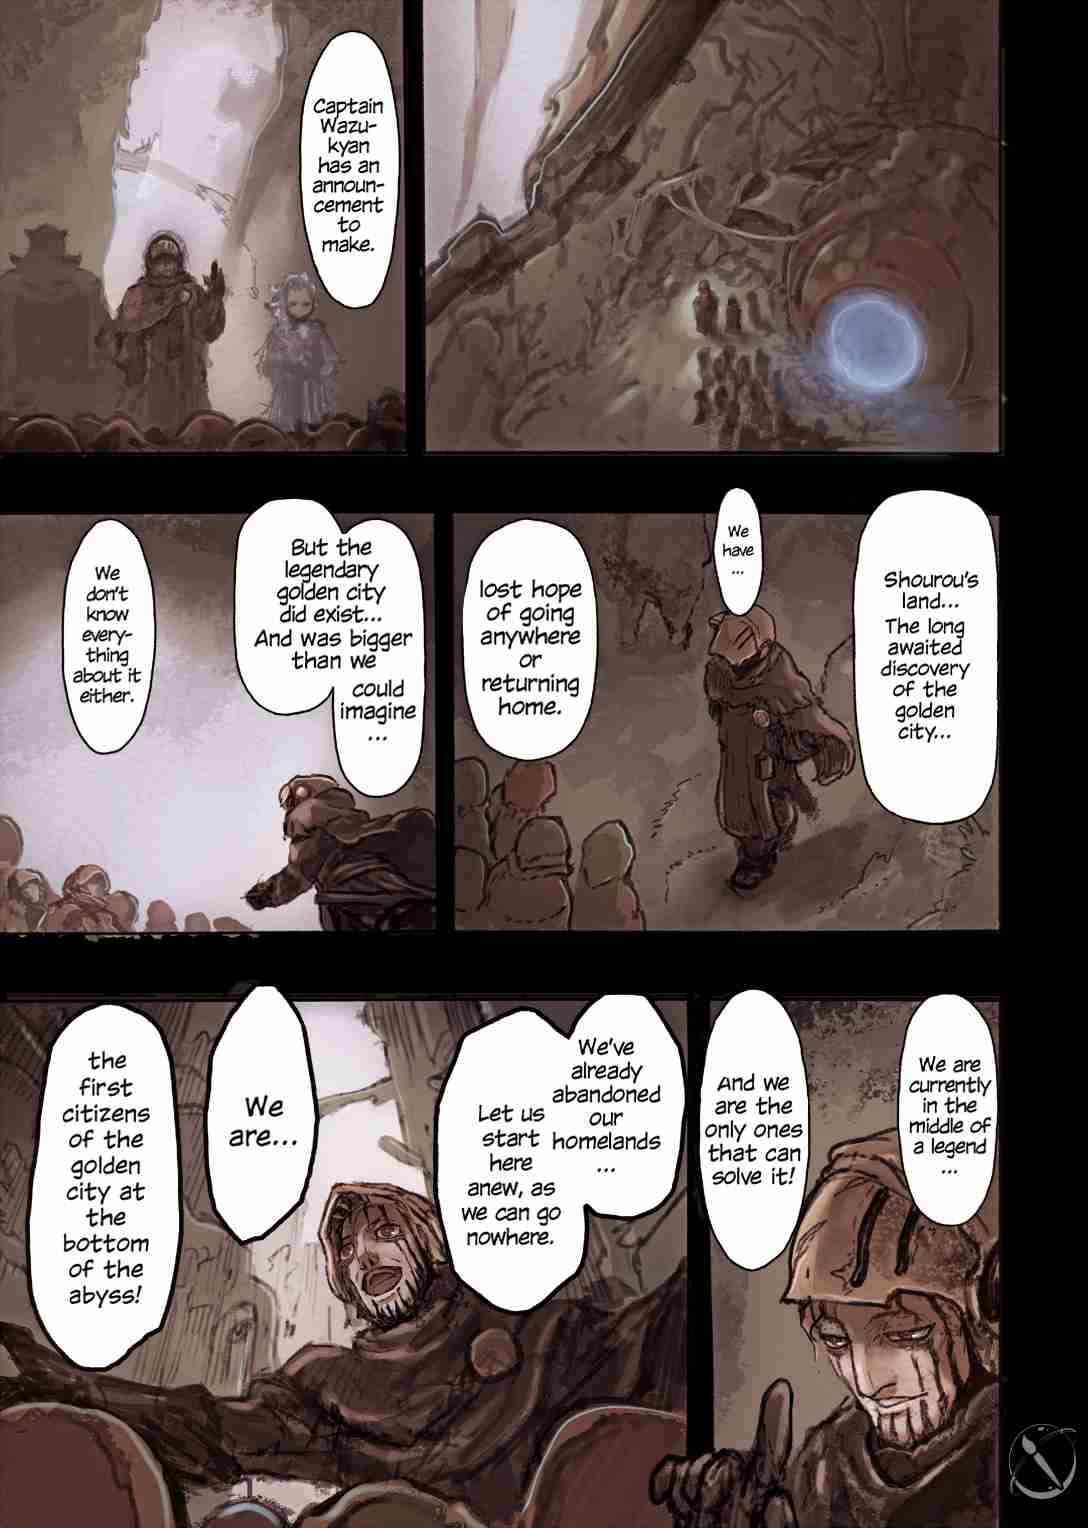 Made In Abyss (Fan Colored) Vol. 7 Ch. 47 The Secret of the Village